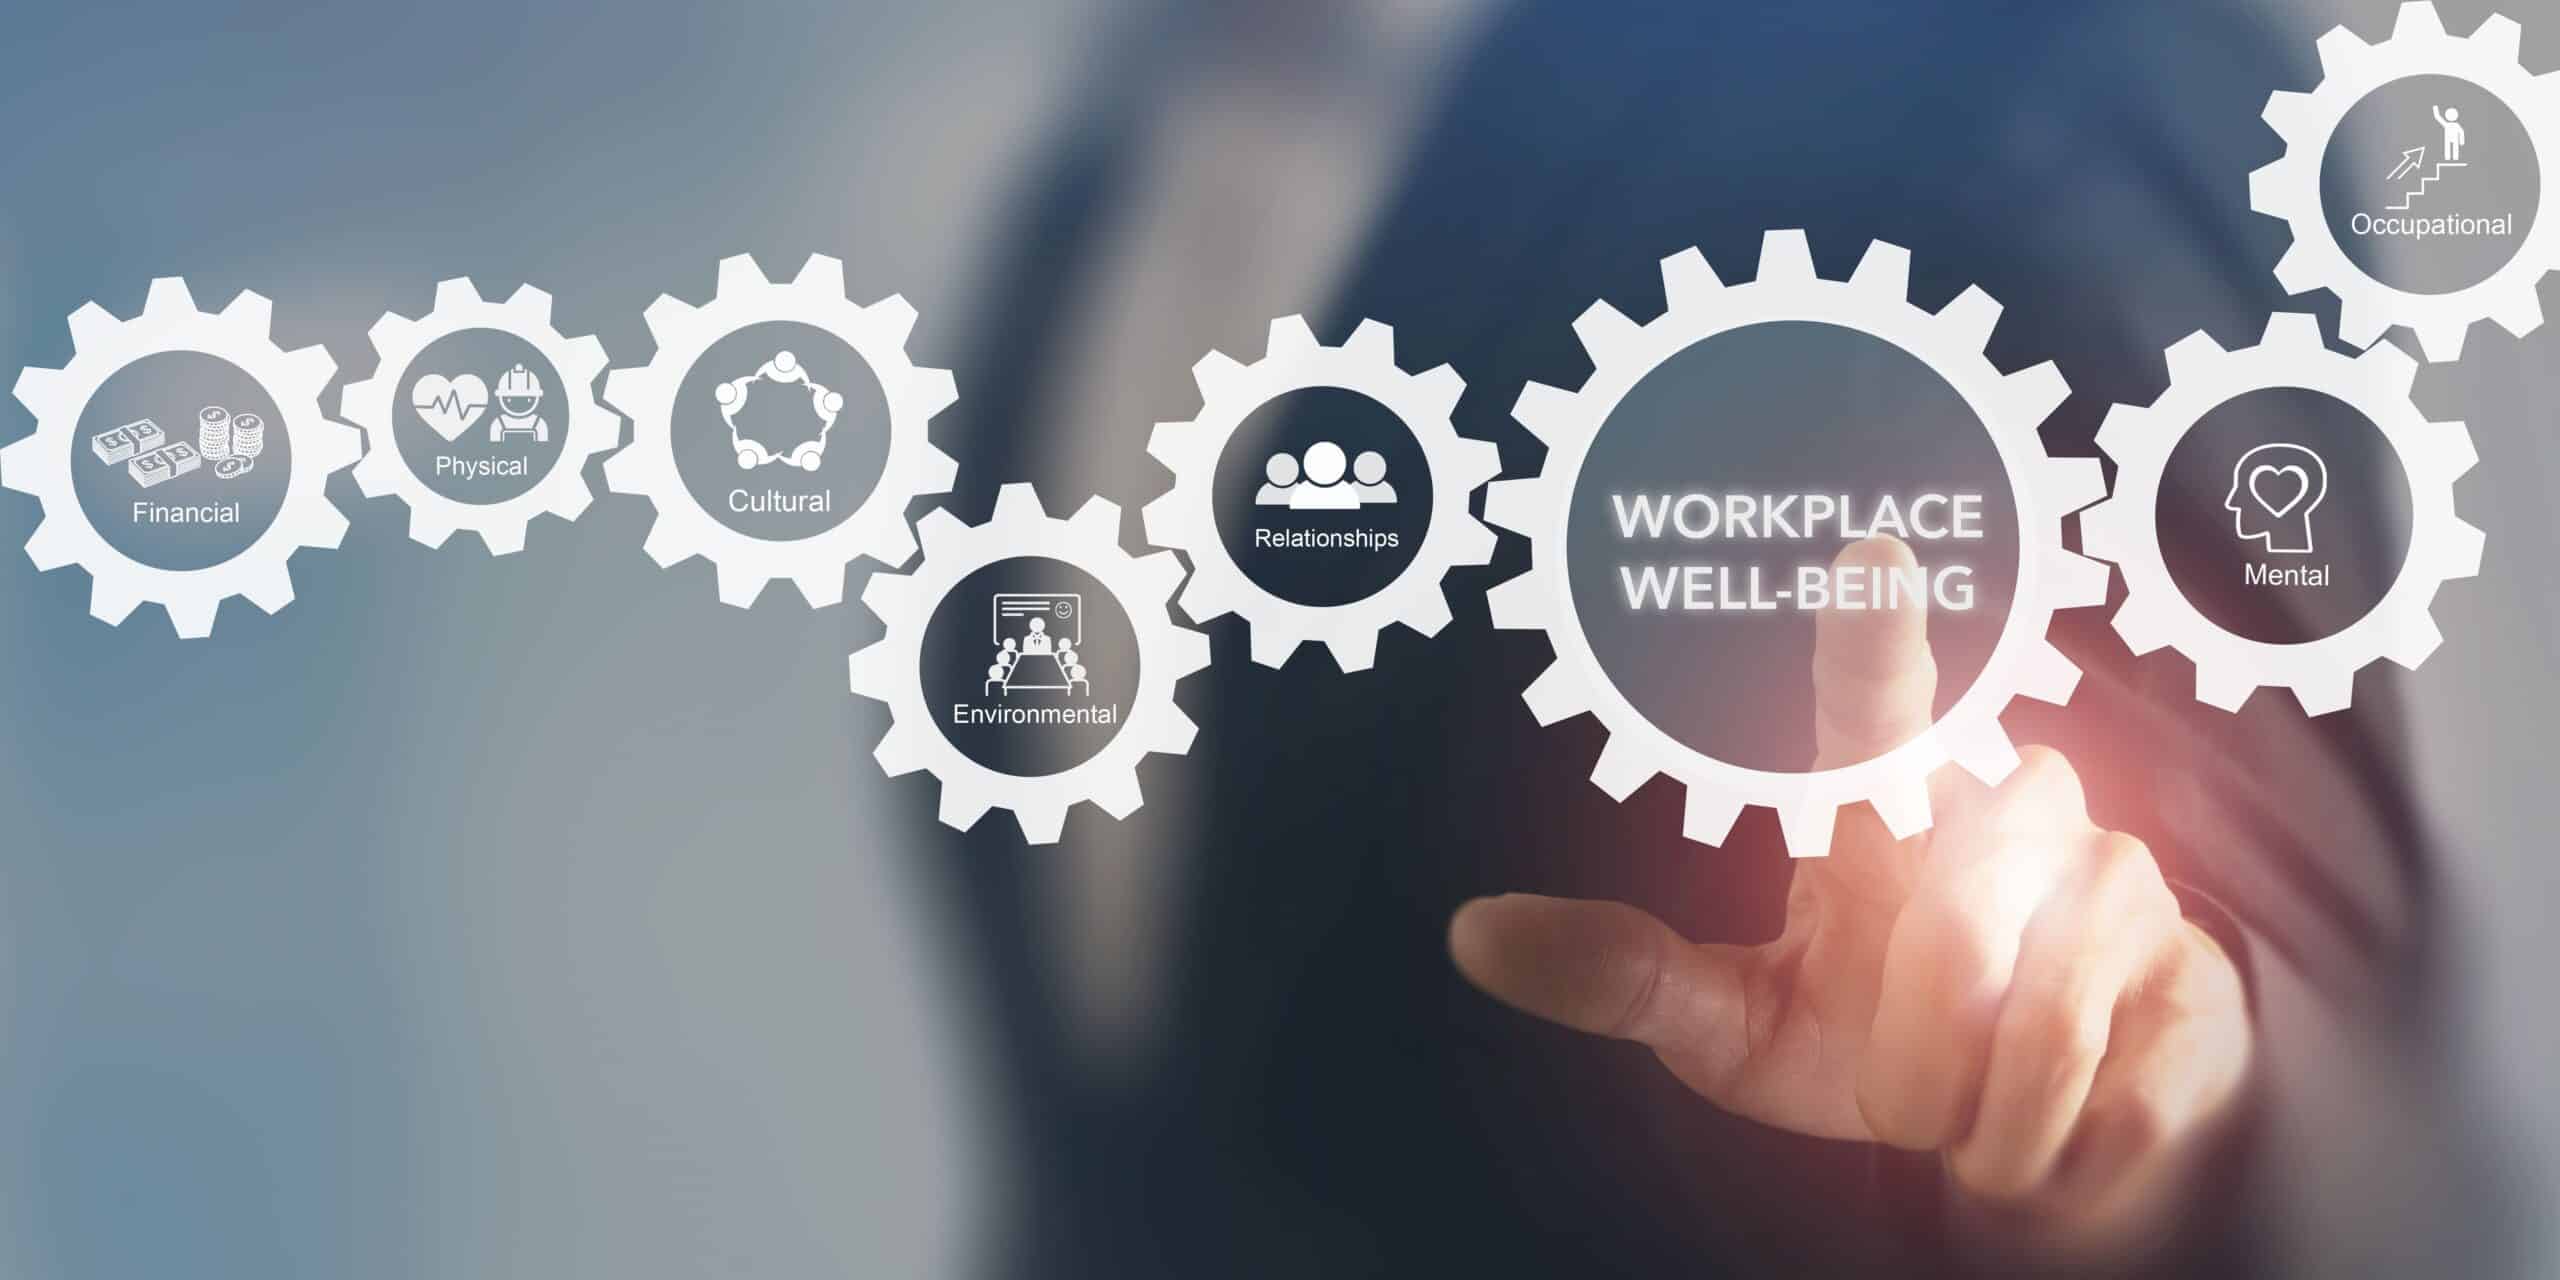 A series of interconnected cogs contain a series of words; financia, physical, cultural, eenvironmental, relationships, mental, occupational and workplace well-being. A man is touching the 'workplace wellbeing' cog.